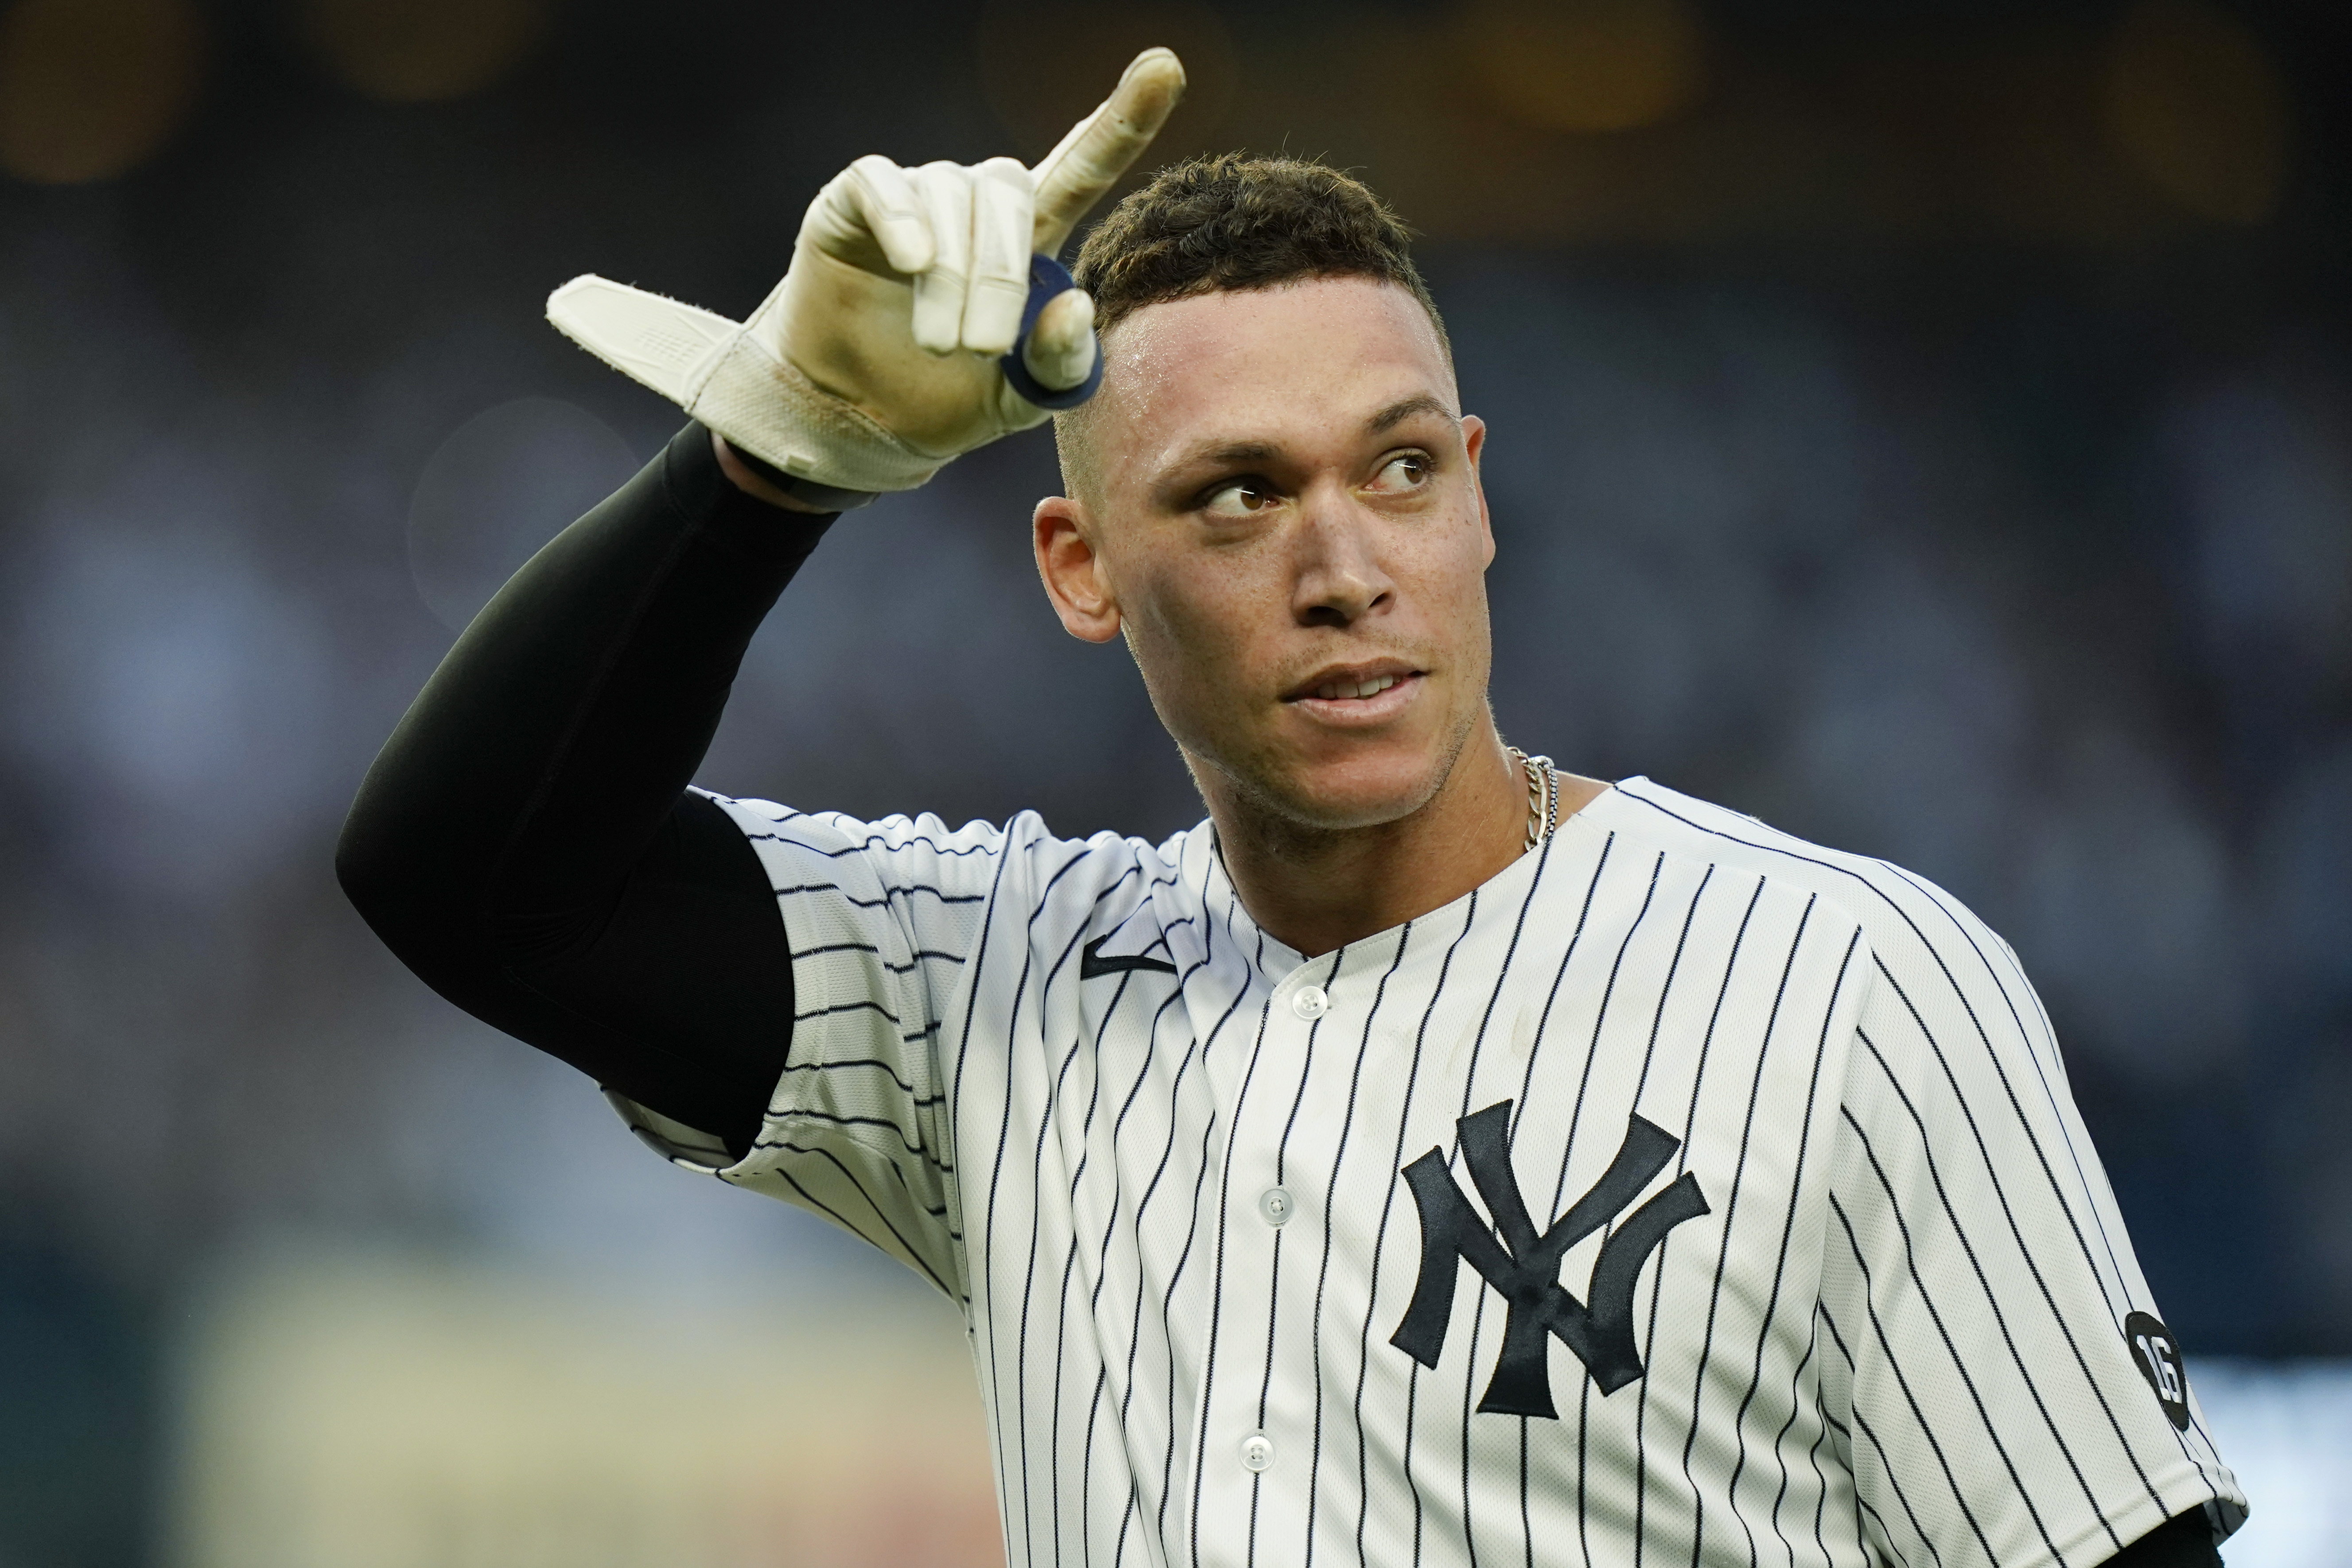 Yankees' Aaron Judge and the importance of the yankees mlb jersey